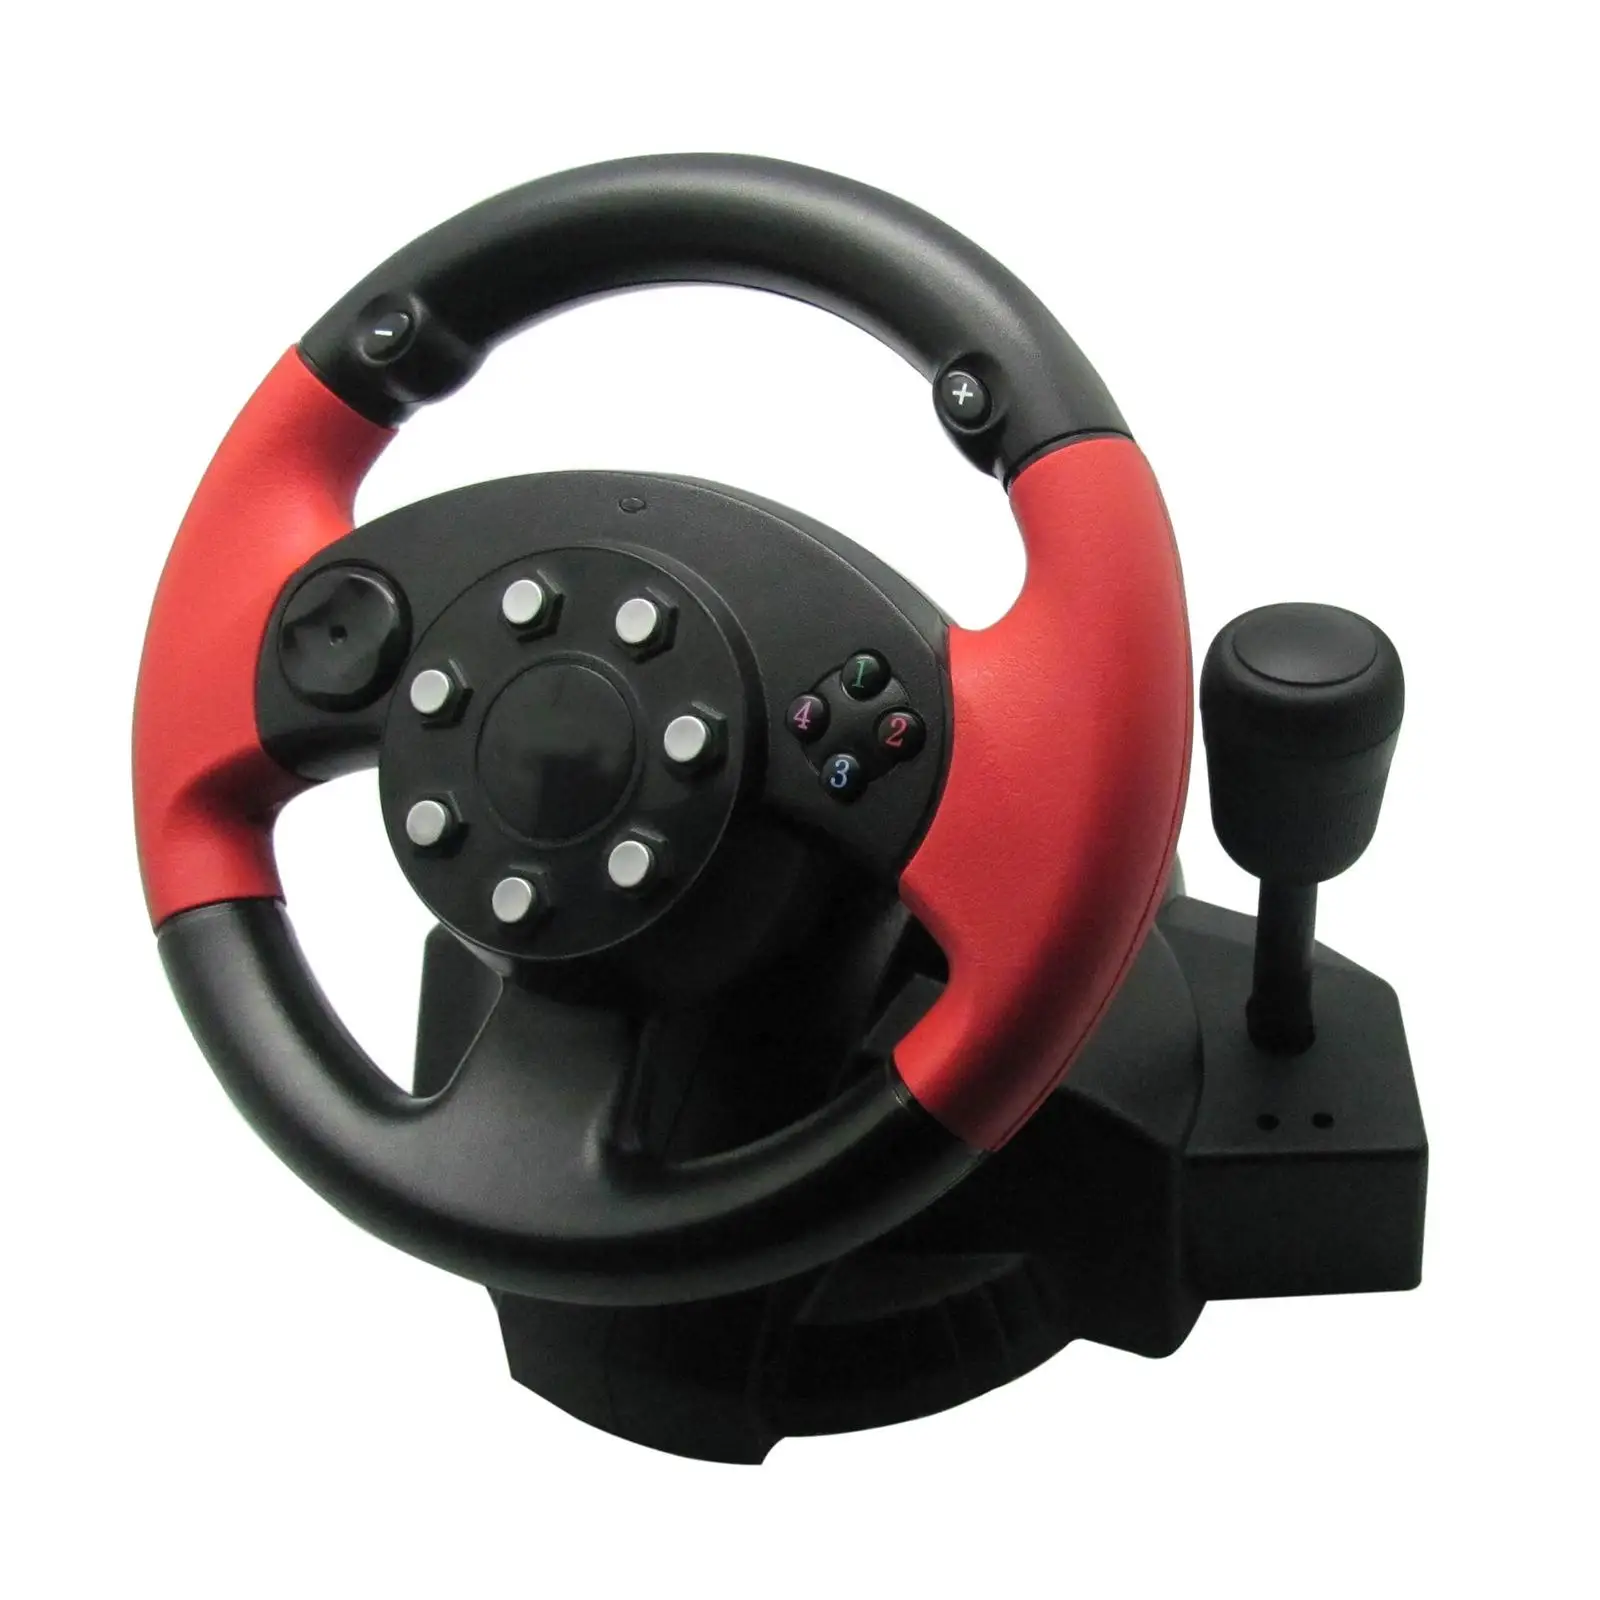 Race Steering Wheel with Floor Pedals Automatic Centering Function with Vibration Racing Steering Wheel Racing Driving Wheel